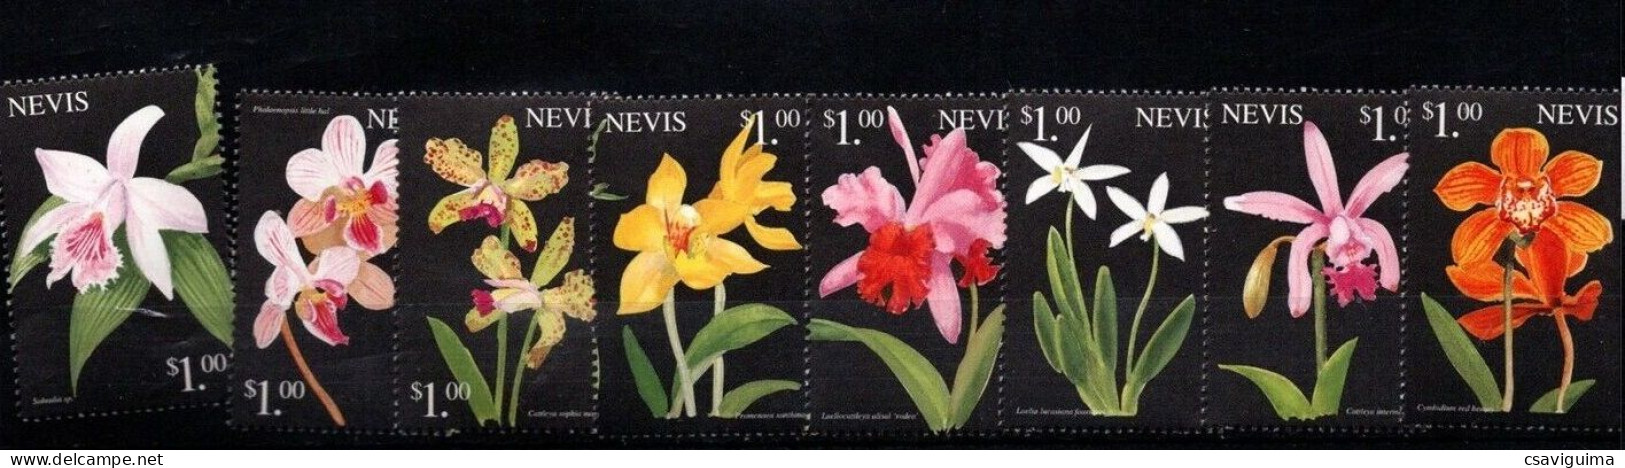 Nevis - 1999 - Flowers: Orchids - Yv 1283/90 (from Sheet) - Orchids